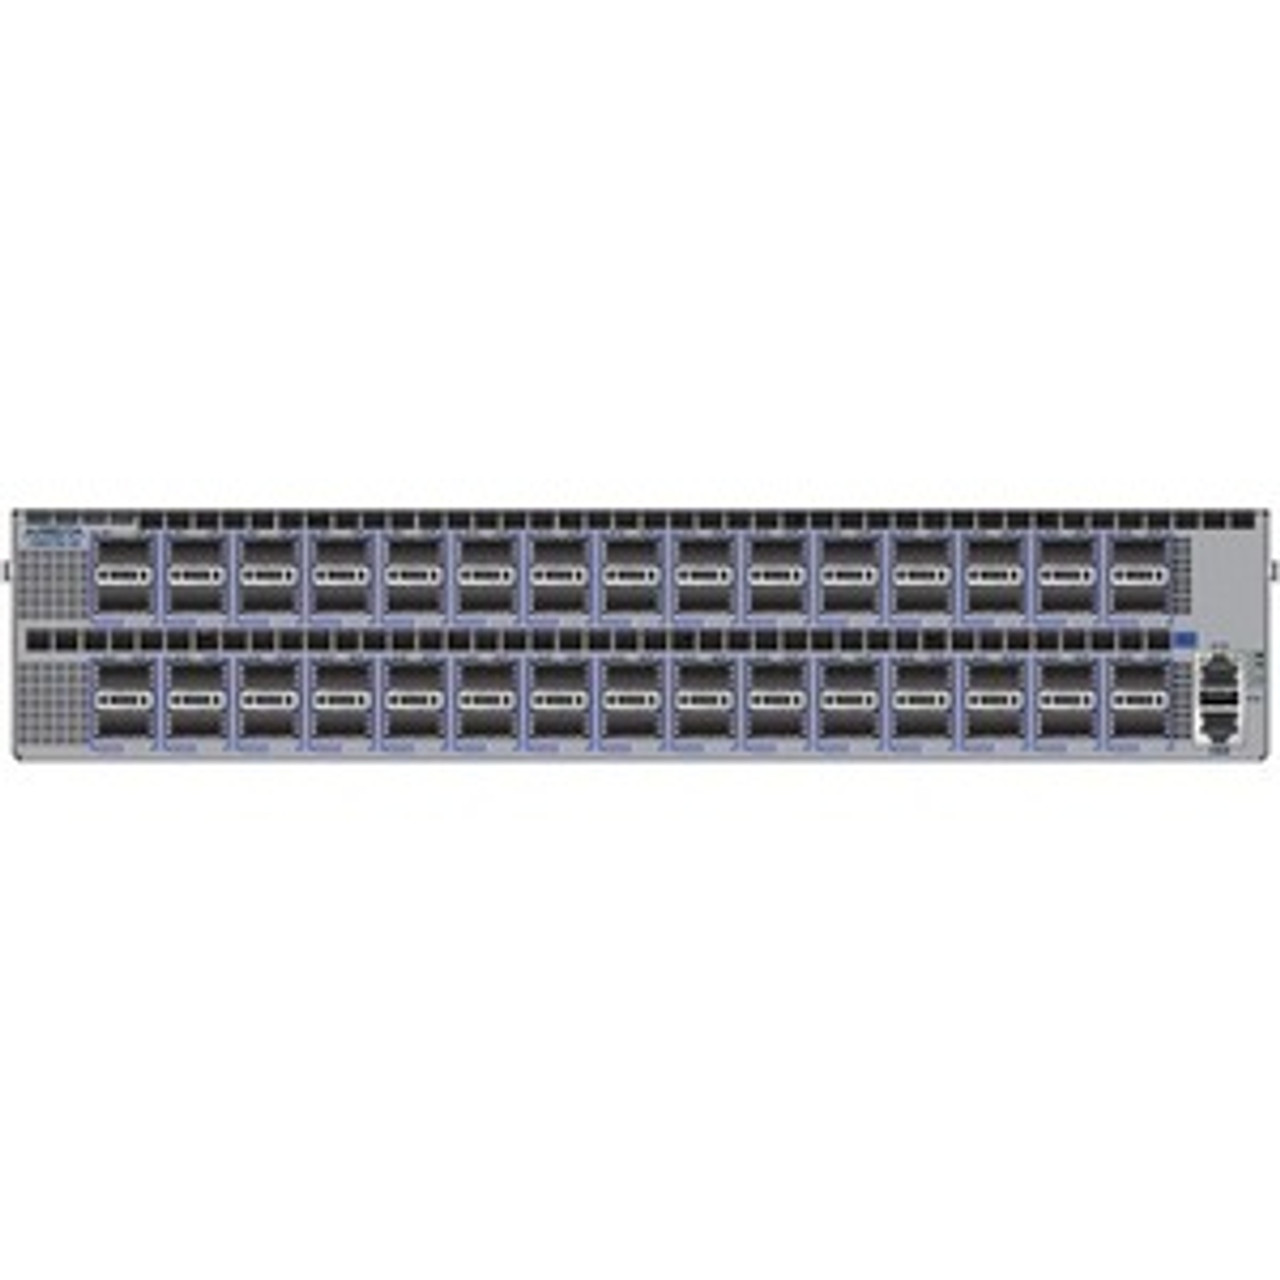 DCS-7280CR2A-60-F Arista Networks 7280CR2A-60 Layer 3 Switch - Manageable - 3 Layer Supported - Modular - Optical Fiber - 2U High - Rack-mountable, Rail-mountable - 1